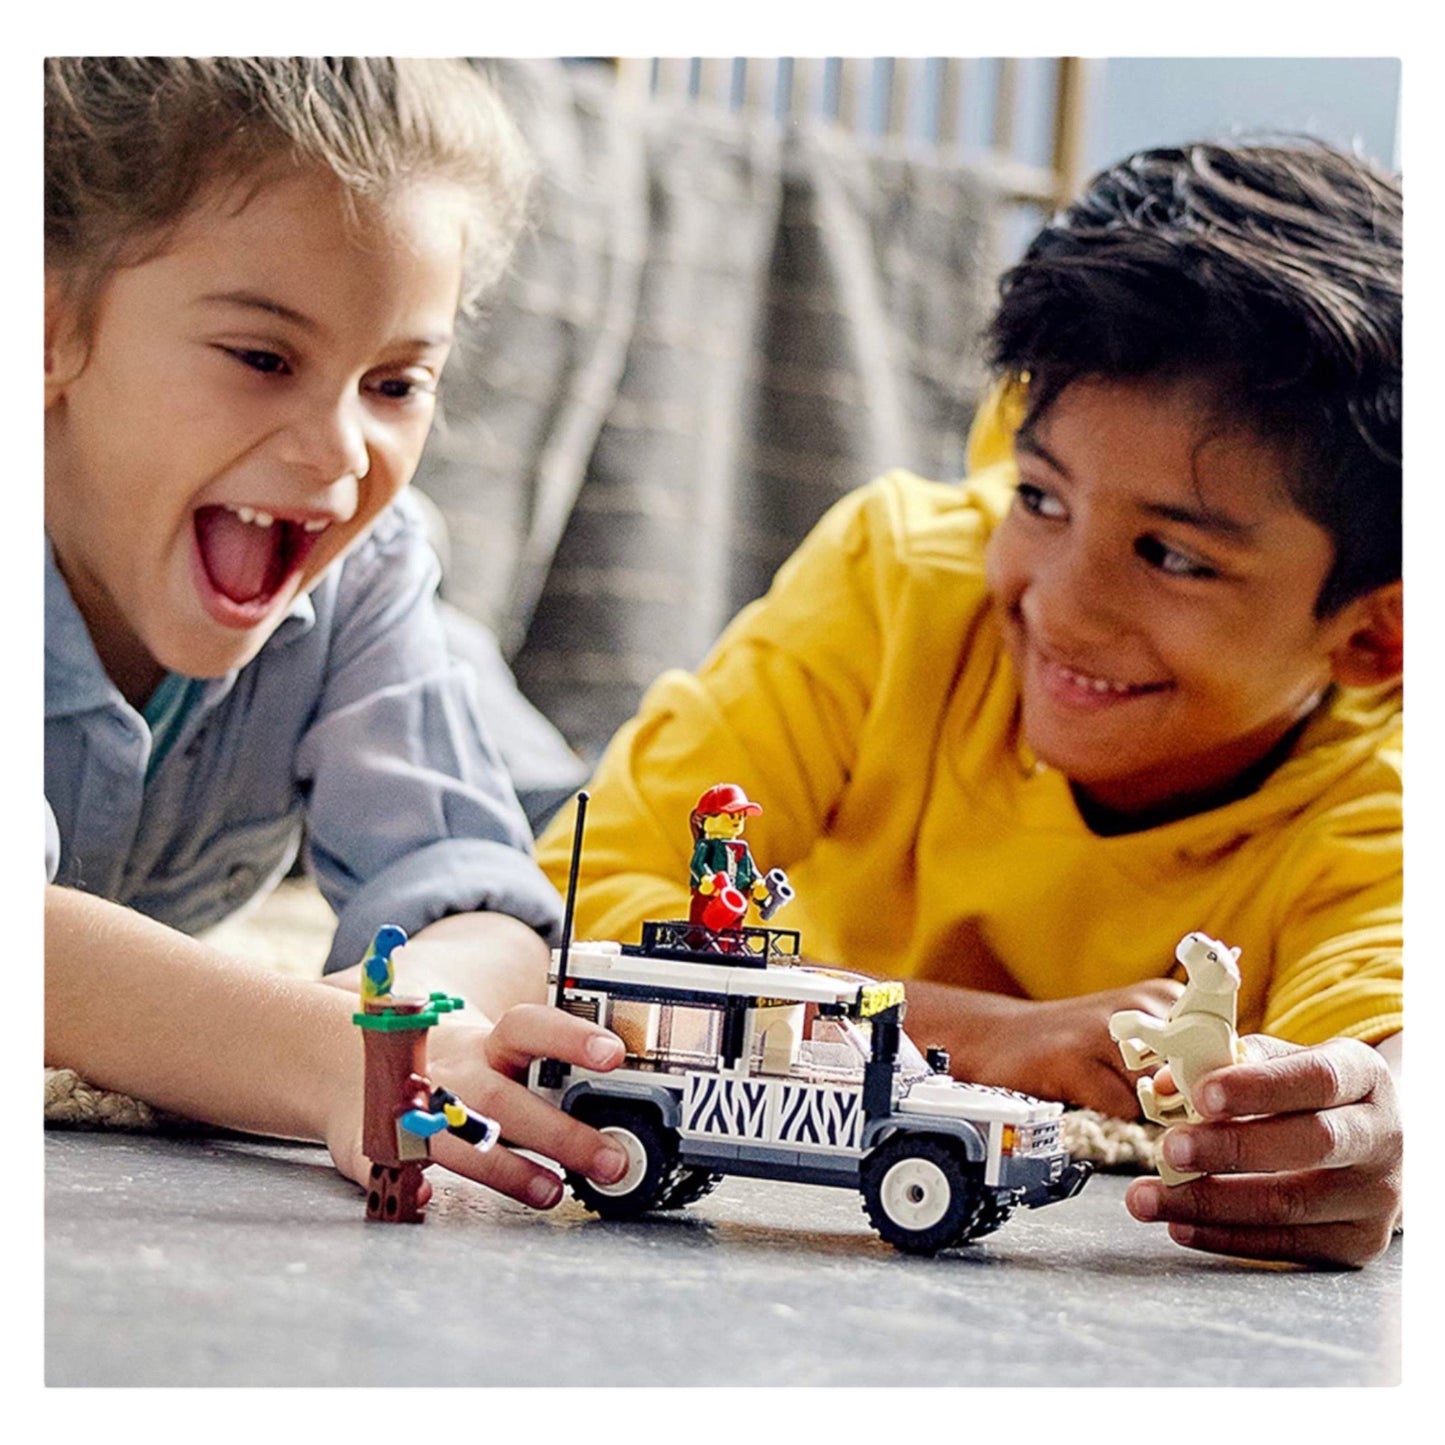 LEGO CITY 60267 Go on Safari with the LEGO City Off-roader play set